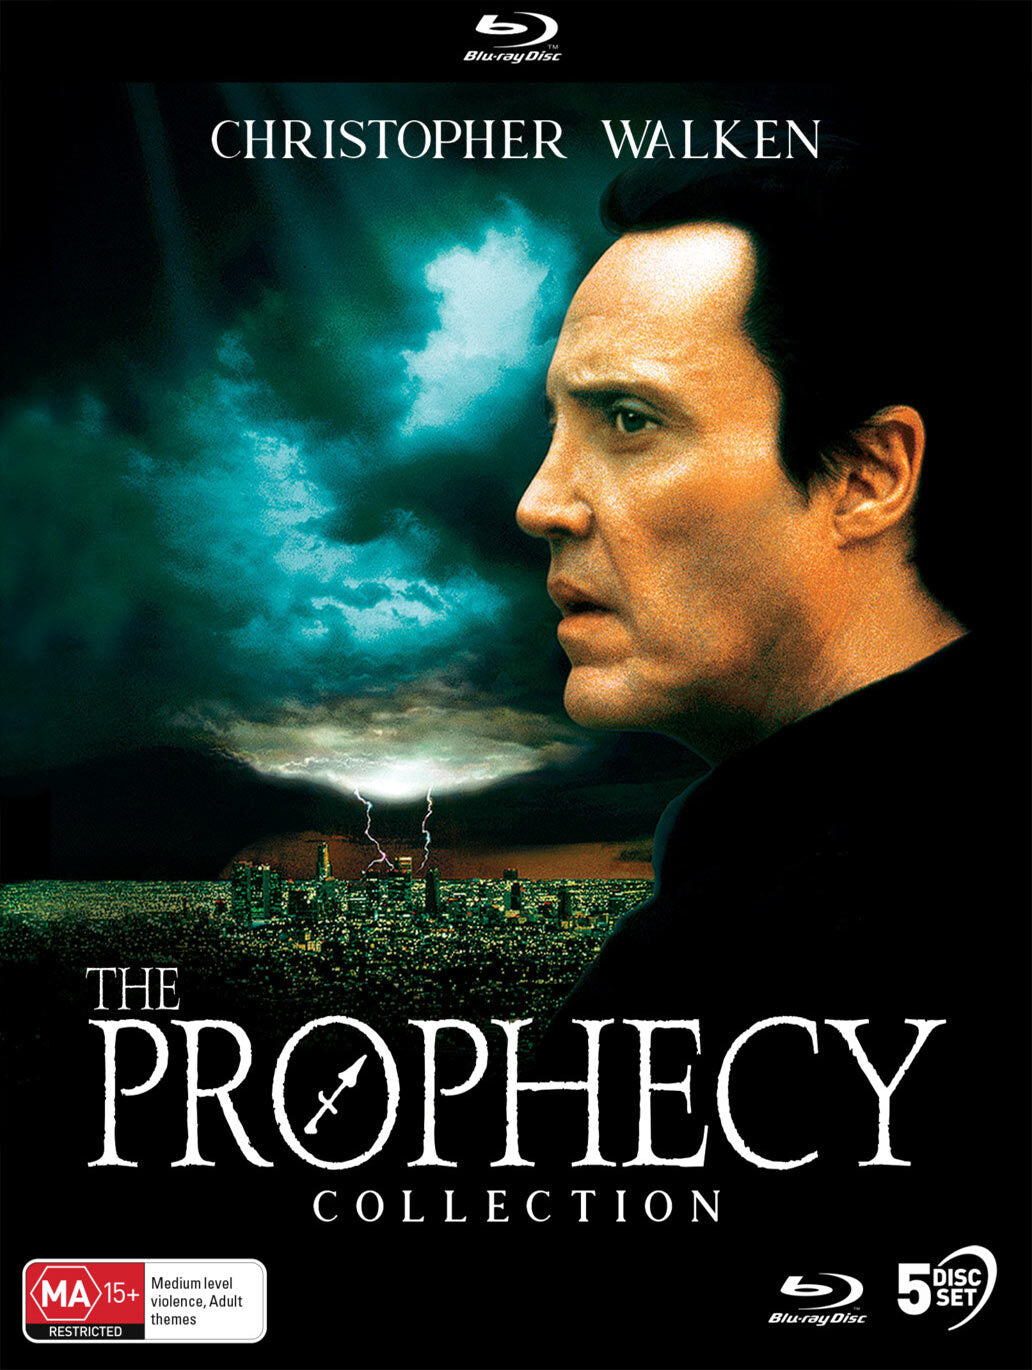 THE PROPHECY COLLECTION (REGION FREE IMPORT - LIMITED EDITION) BLU-RAY